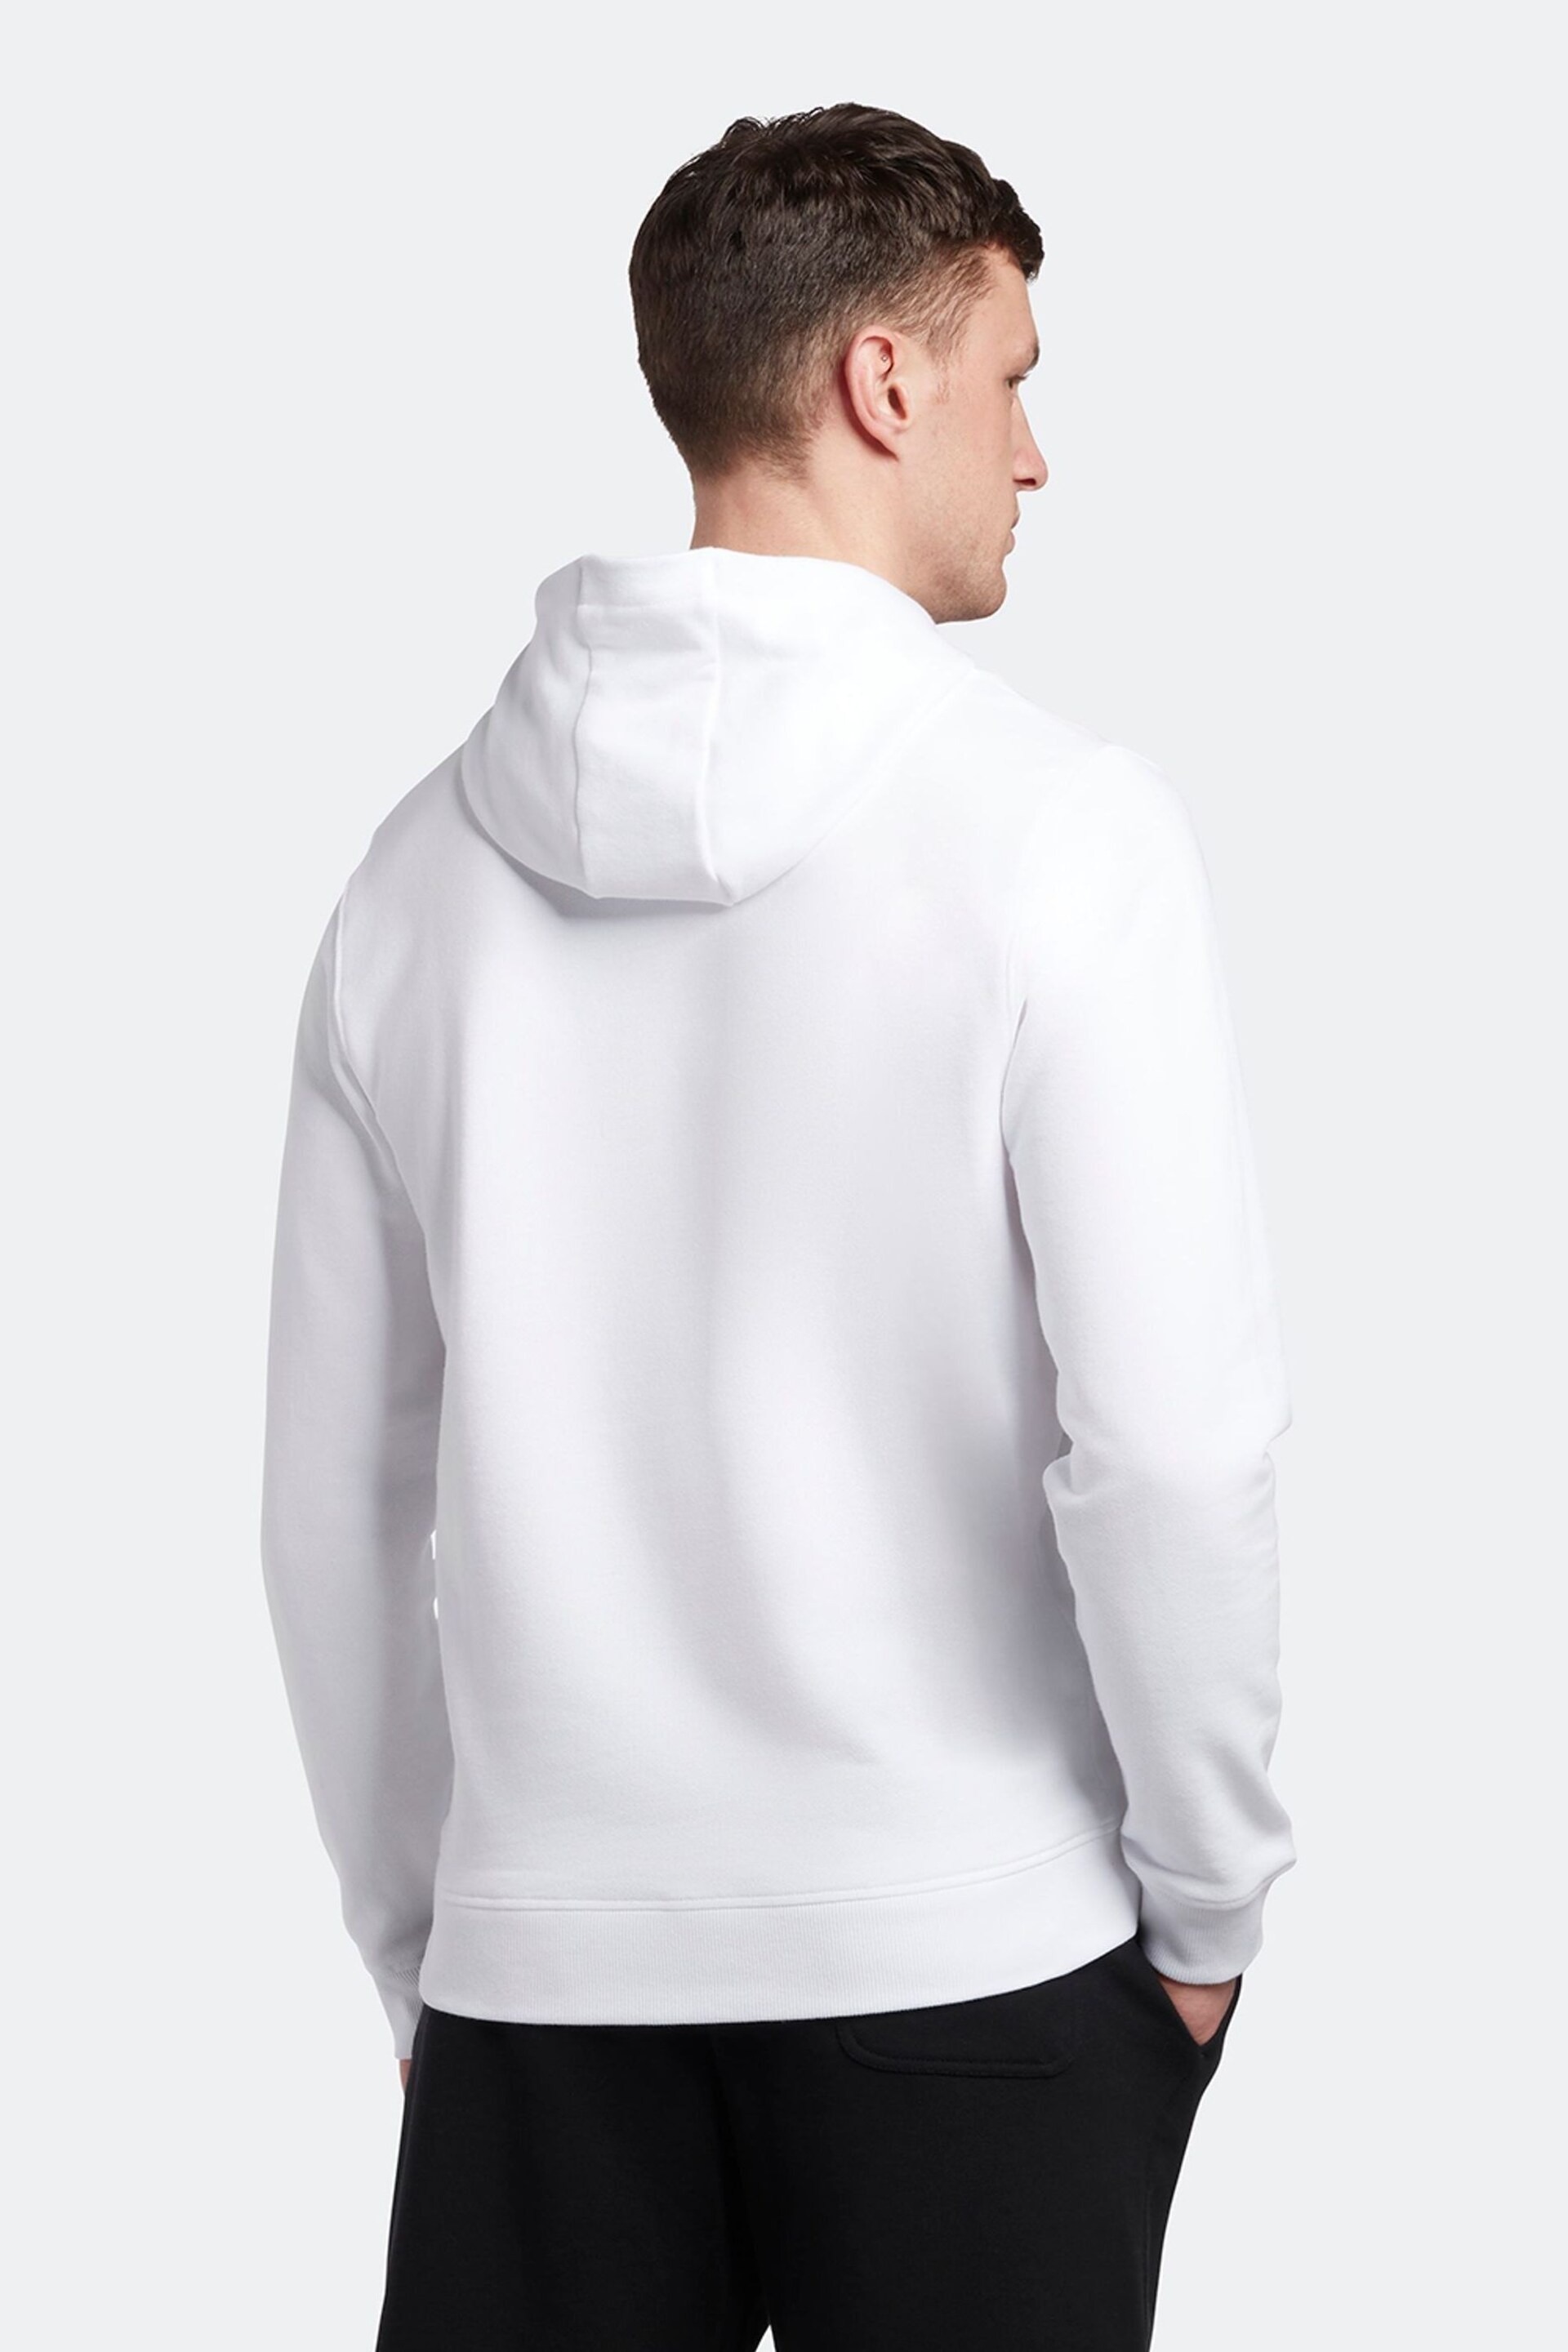 Lyle & Scott Pullover White Hoodie - Image 4 of 9